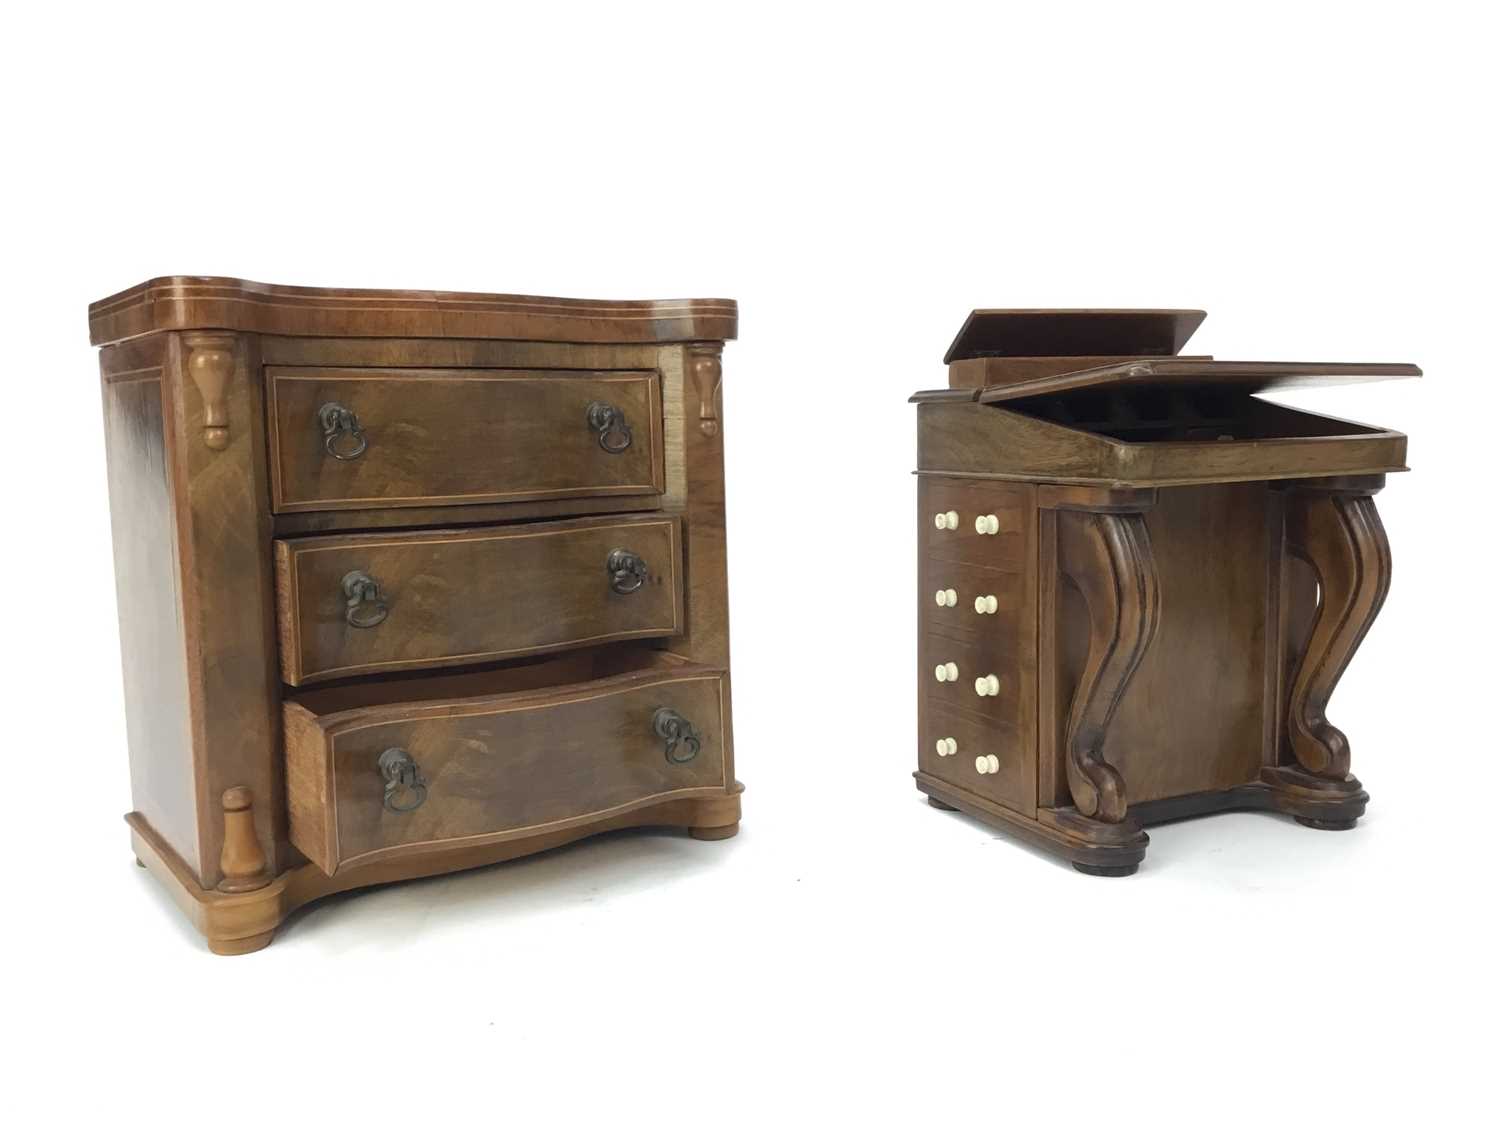 Lot 1376 - A 20TH CENTURY APPRENTICE PIECE DAVENPORT DESK AND A CHEST OF DRAWERS